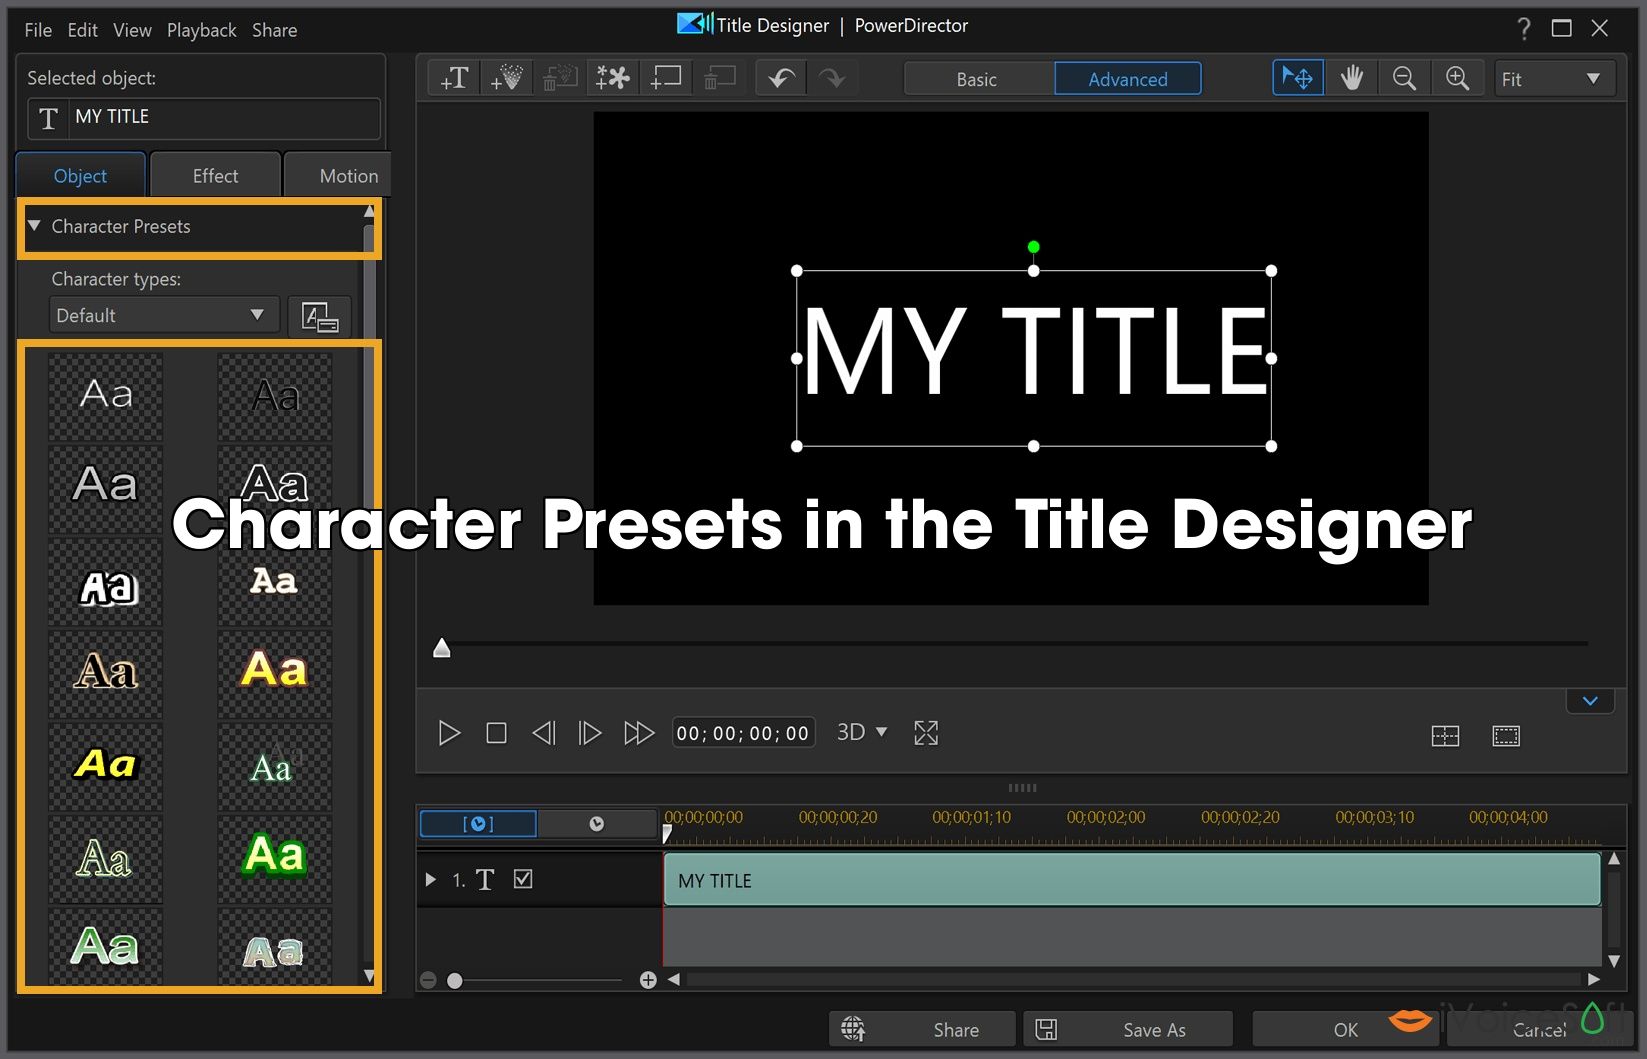  Character Presets in the Title Designer